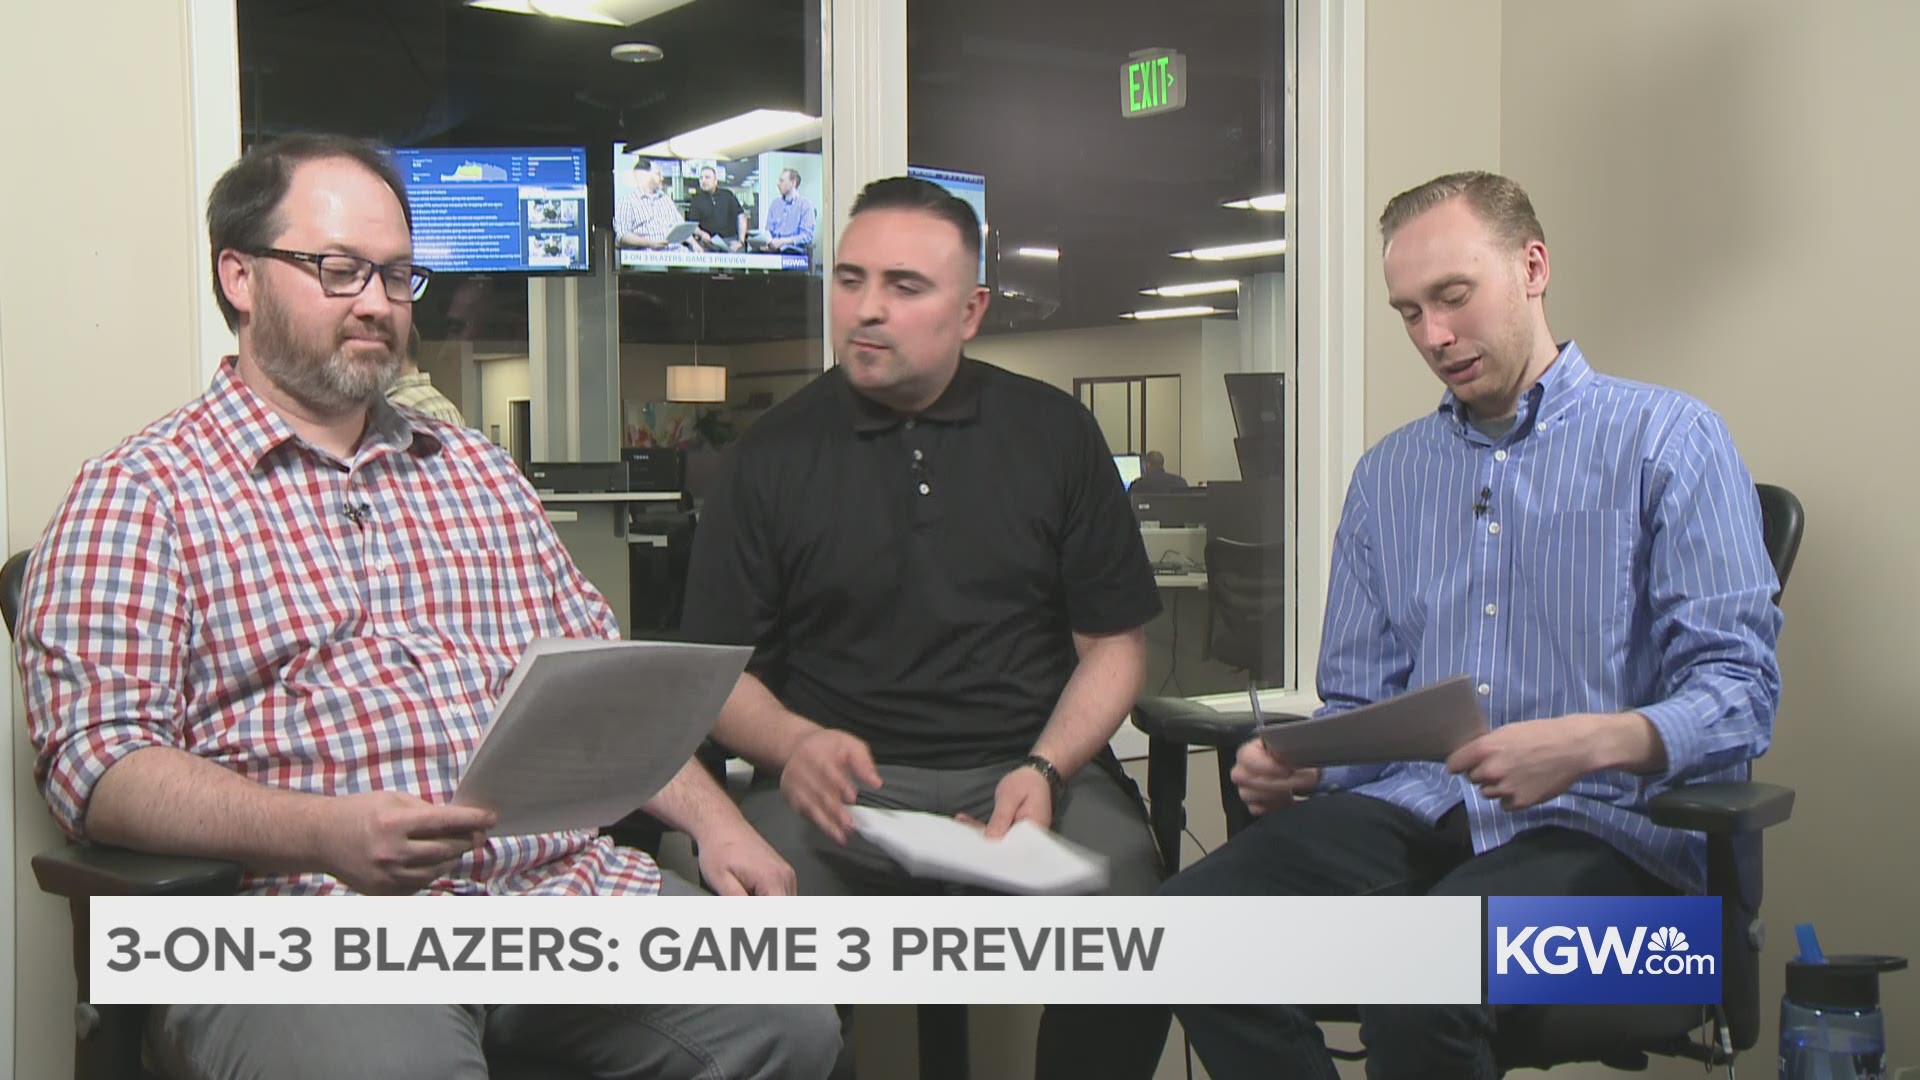 KGW's Jared Cowley, Orlando Sanchez and Nate Hanson talk about their reaction to the Blazers losing the first two games at home in their first-round NBA playoff series against the Pelicans.